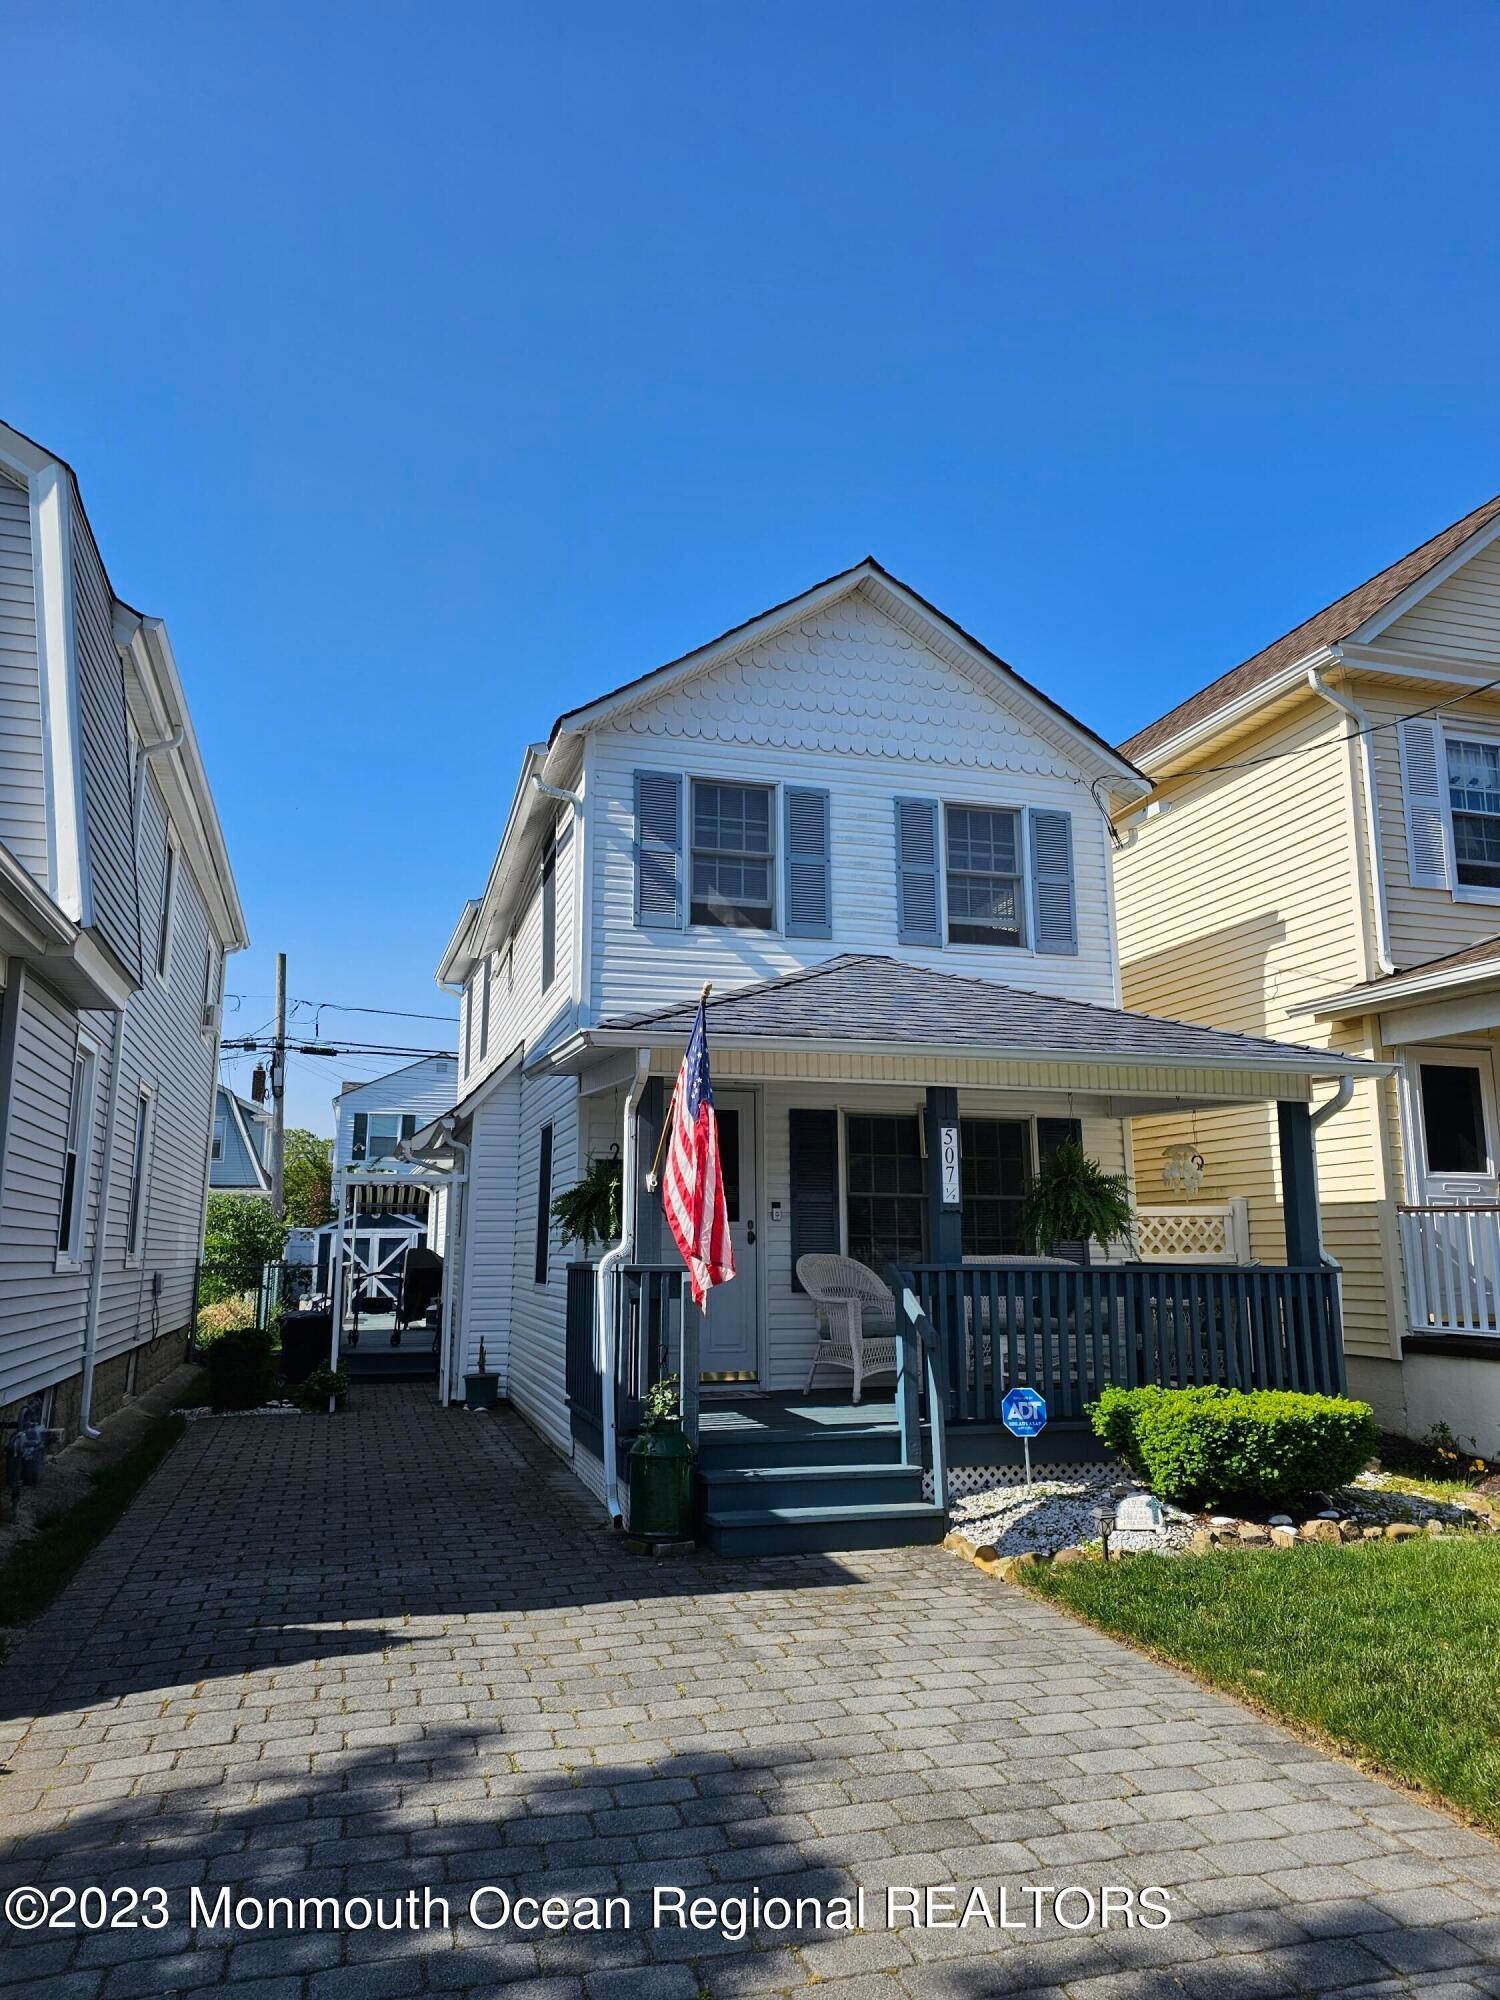 Property for Sale at 507 1/2 Ocean Park Avenue Bradley Beach, New Jersey 07720 United States